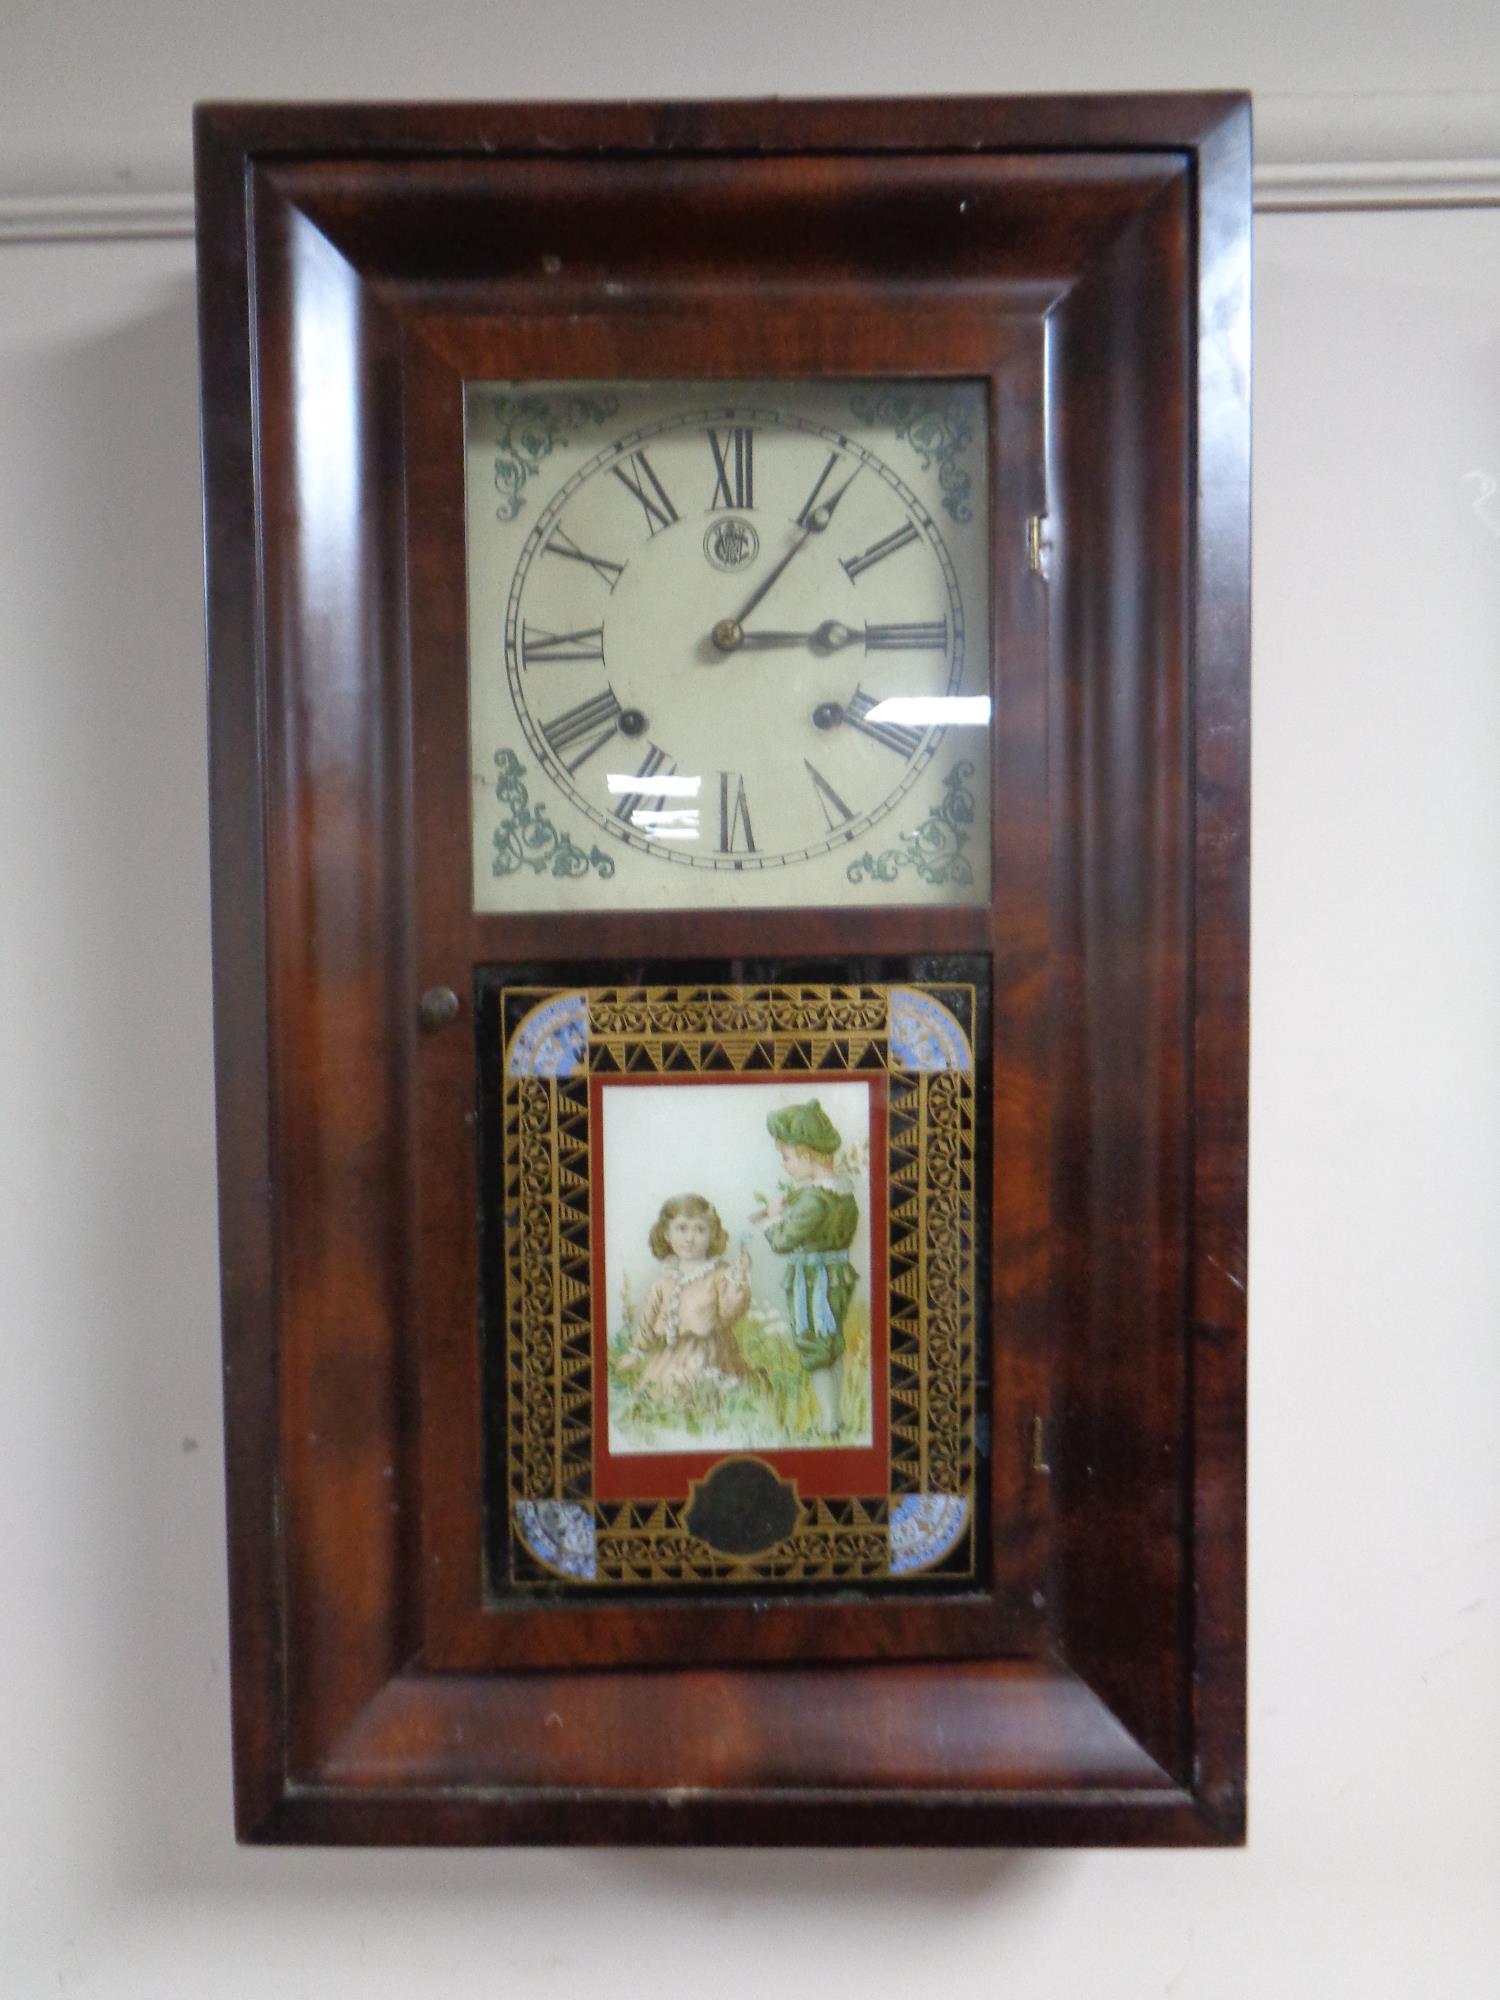 An antique American Water Bury 30 hour wall clock with glass panel depicting two children in a